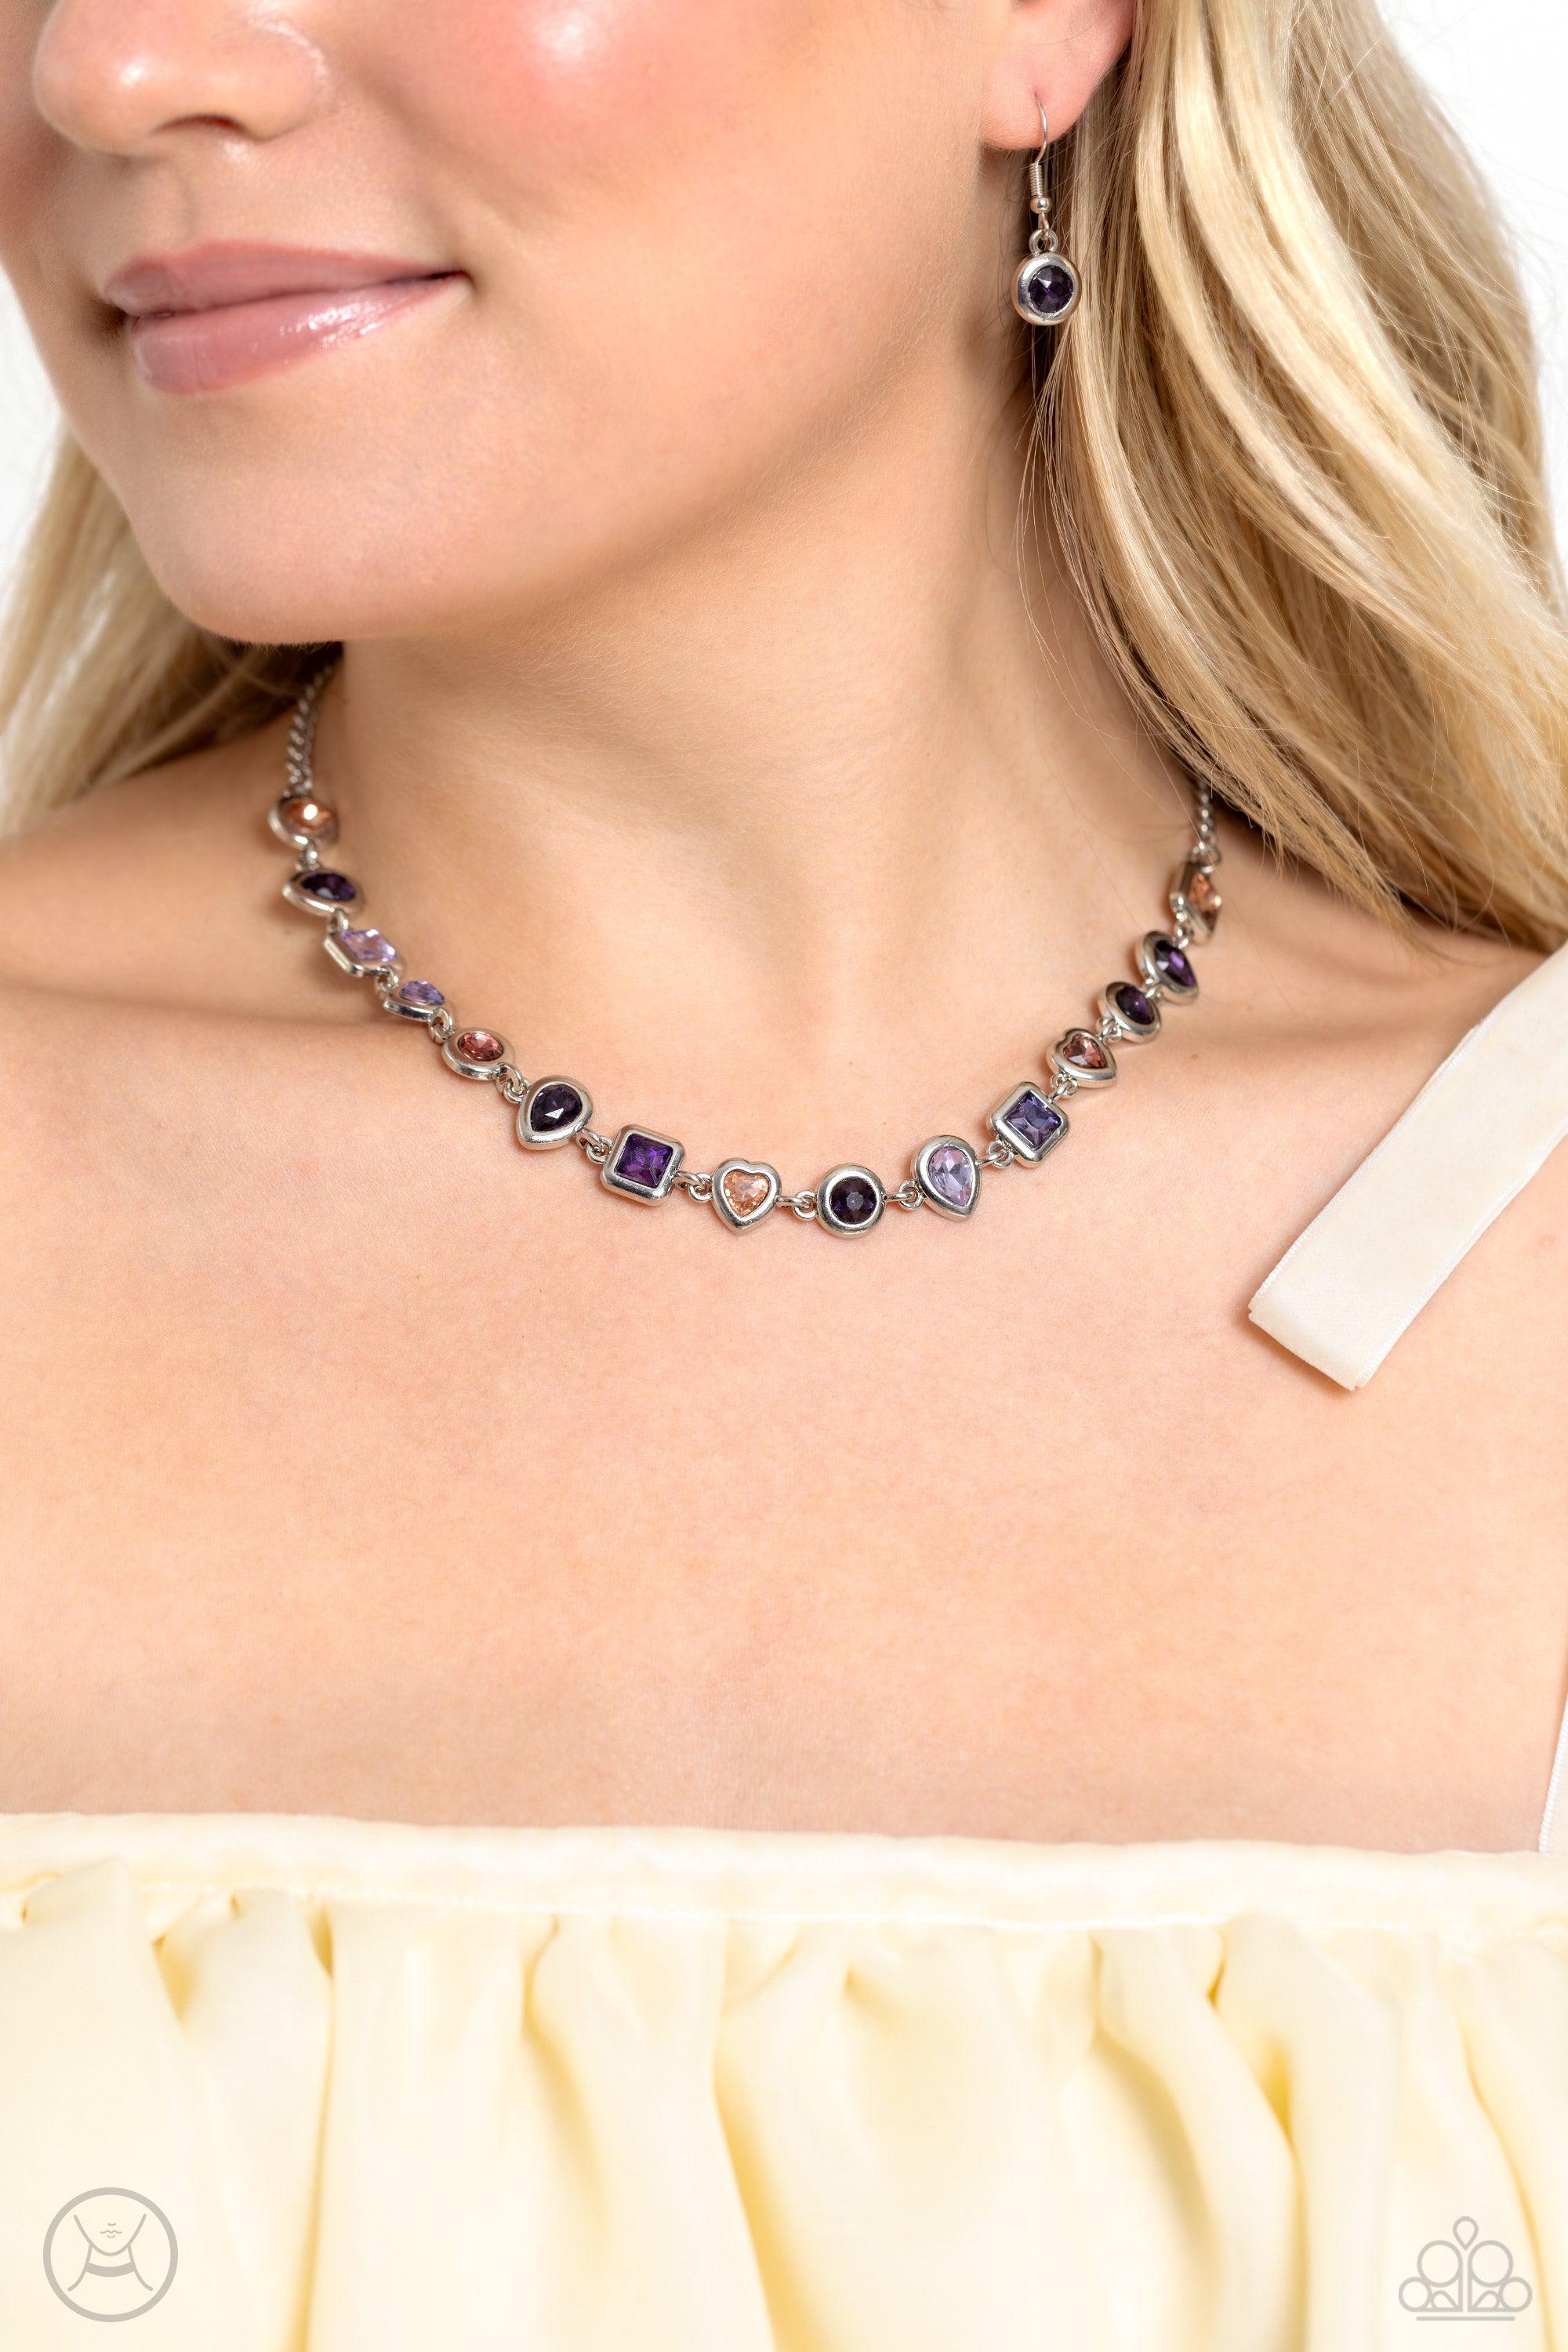 Abstract Admirer Purple Rhinestone Choker Necklace - Paparazzi Accessories- lightbox - CarasShop.com - $5 Jewelry by Cara Jewels